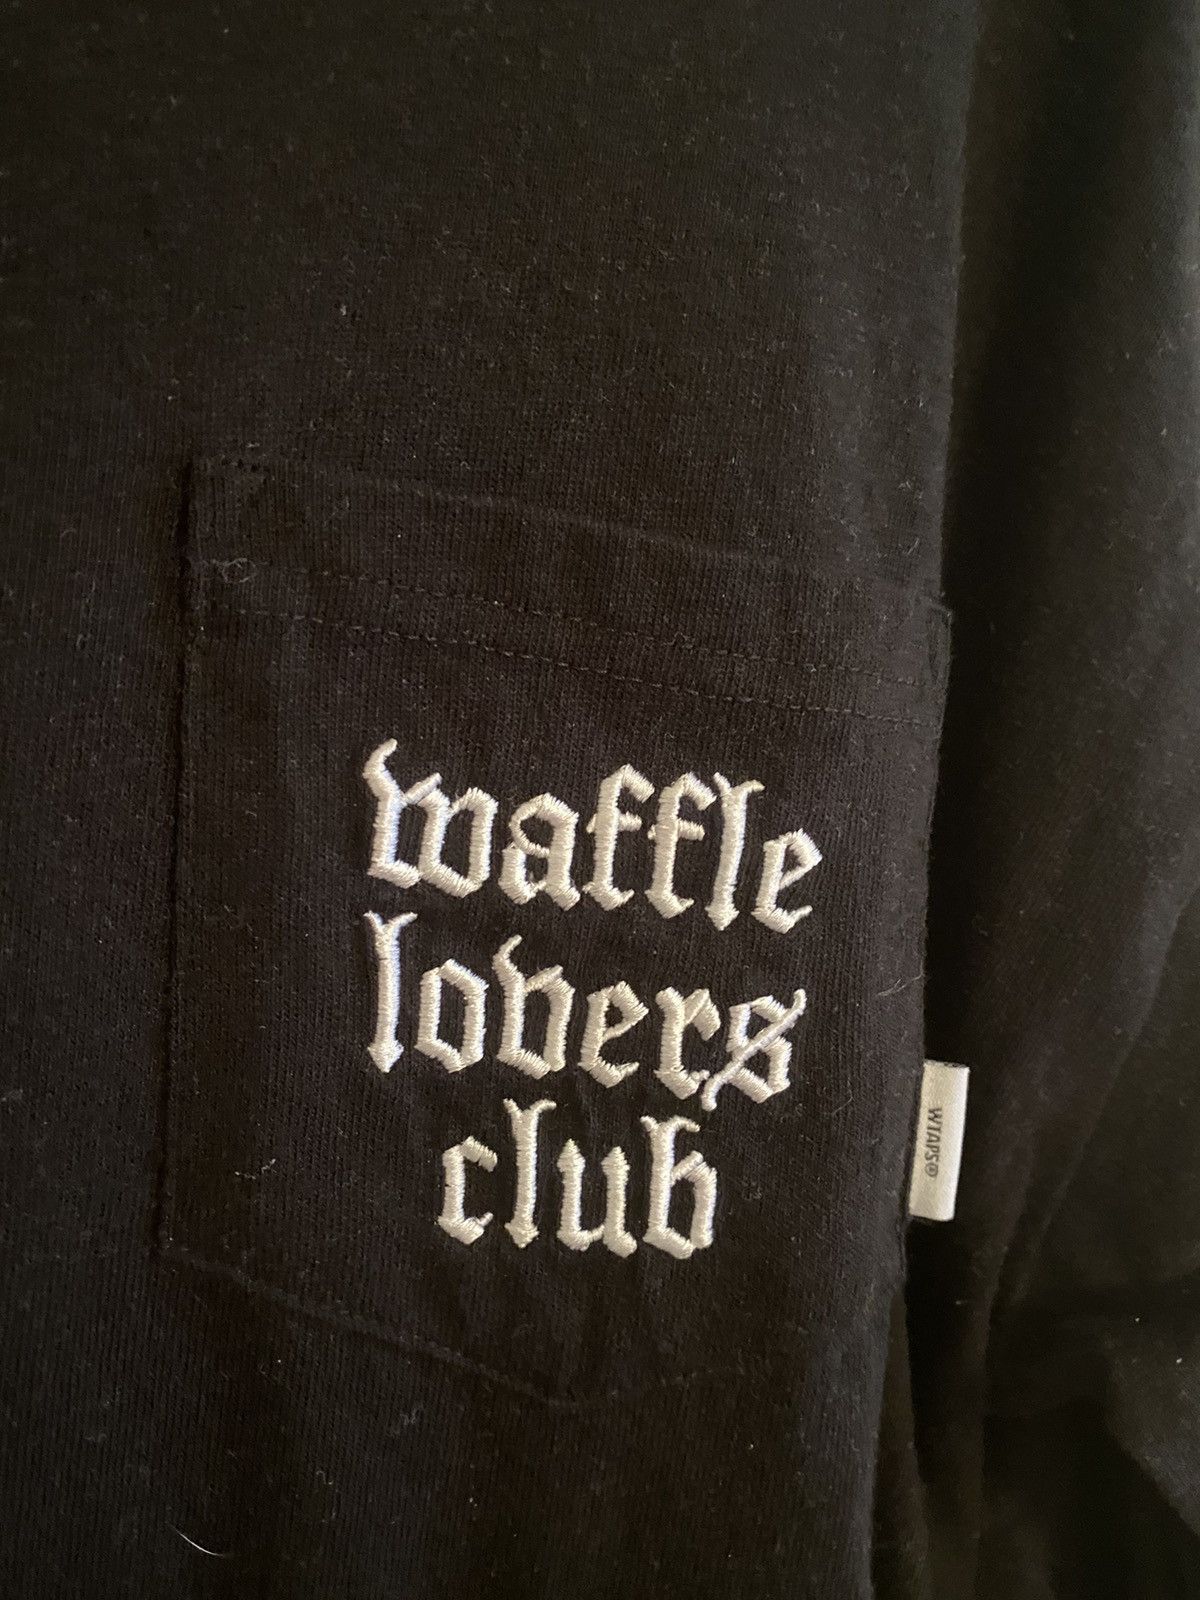 Vans Waffle Lovers Club Long Sleeve Black Size US M / EU 48-50 / 2 - 2 Preview